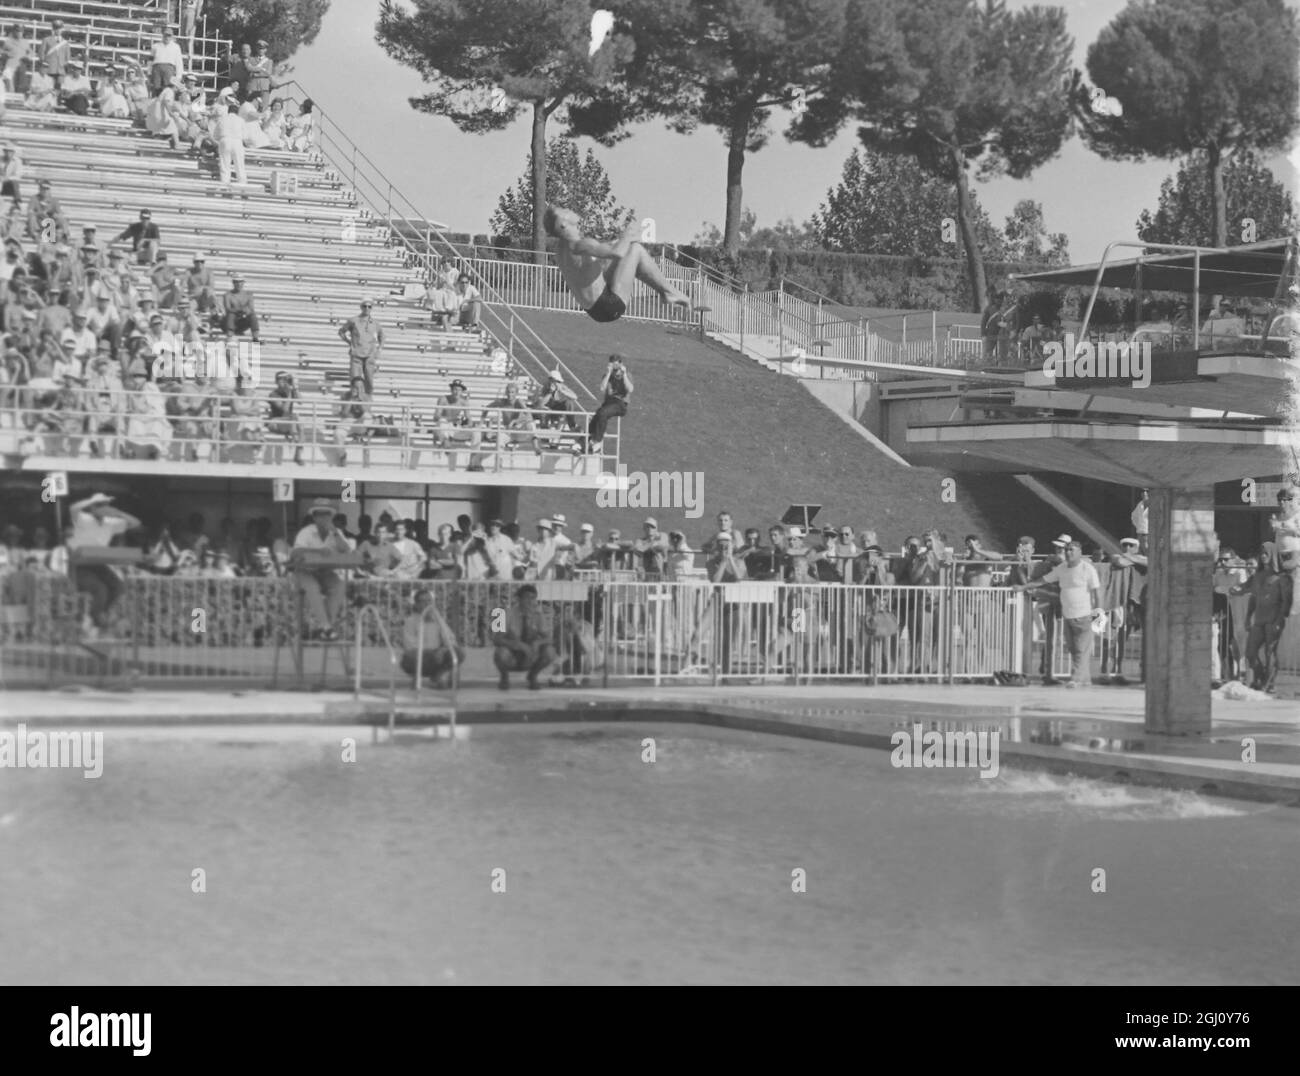 OLYMPIC GAME DIVING MENS 3M TOBIAN IN ACTION 30 AUGUST 1960 Stock Photo